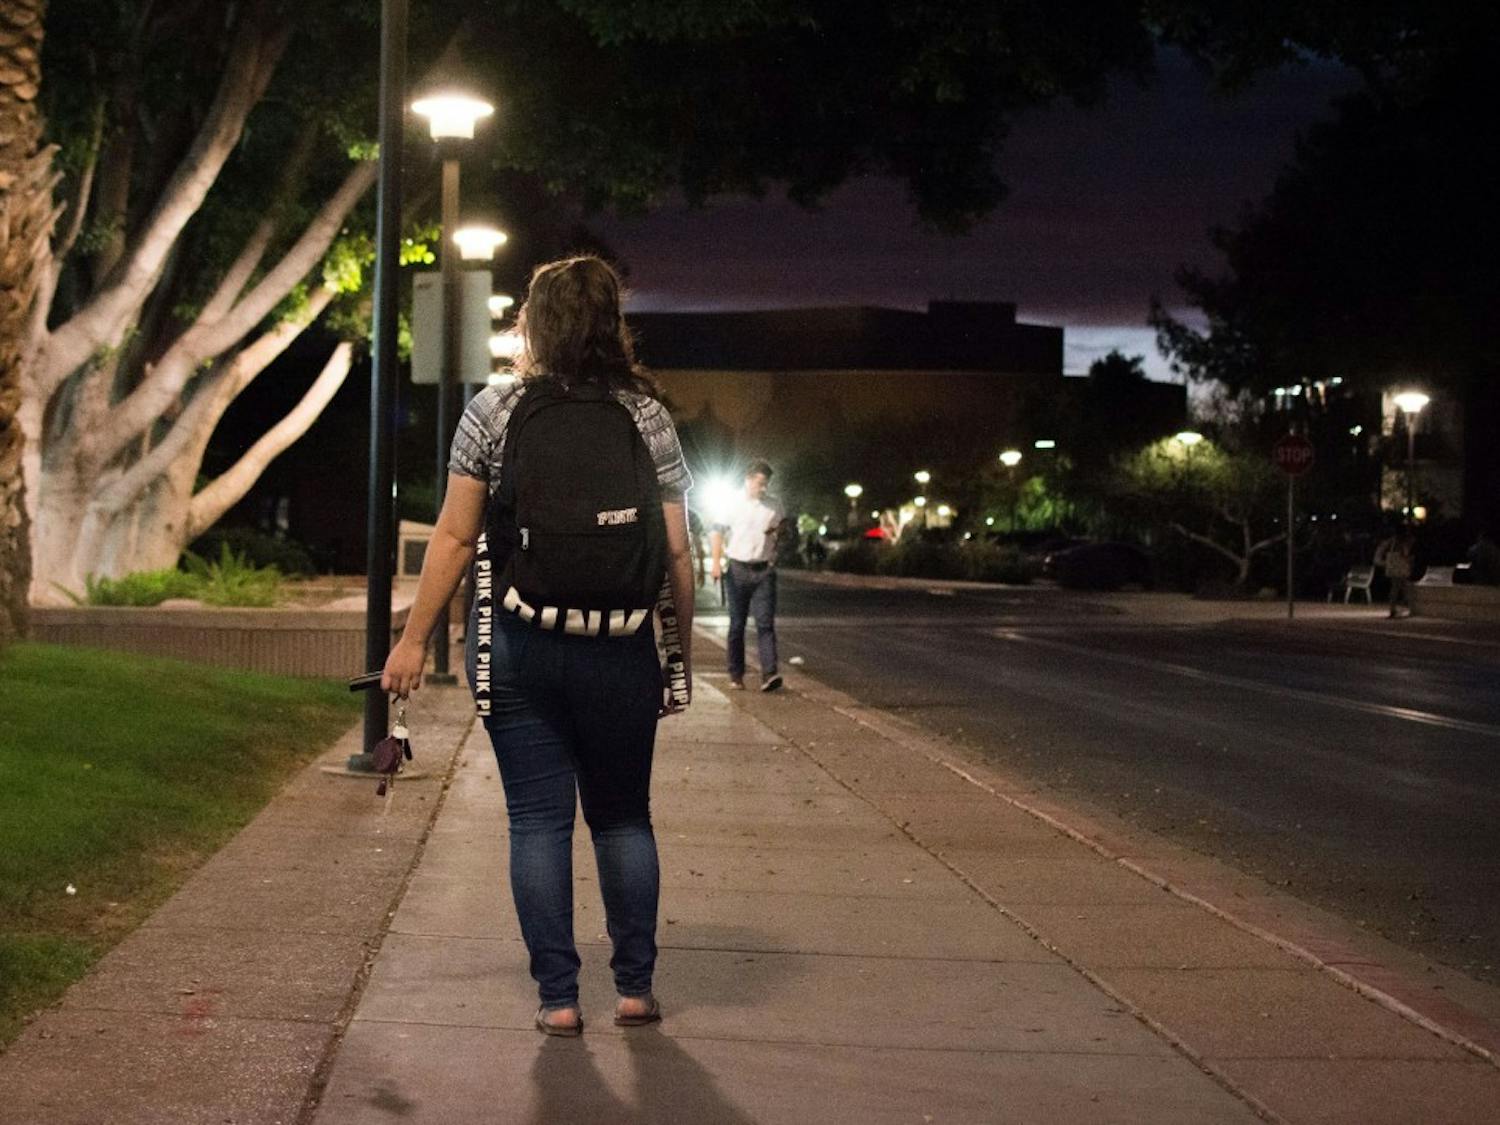 Photo illustration taken on Monday, April 17, 2017 depicting a female student walking alone at night holding pepper spray.